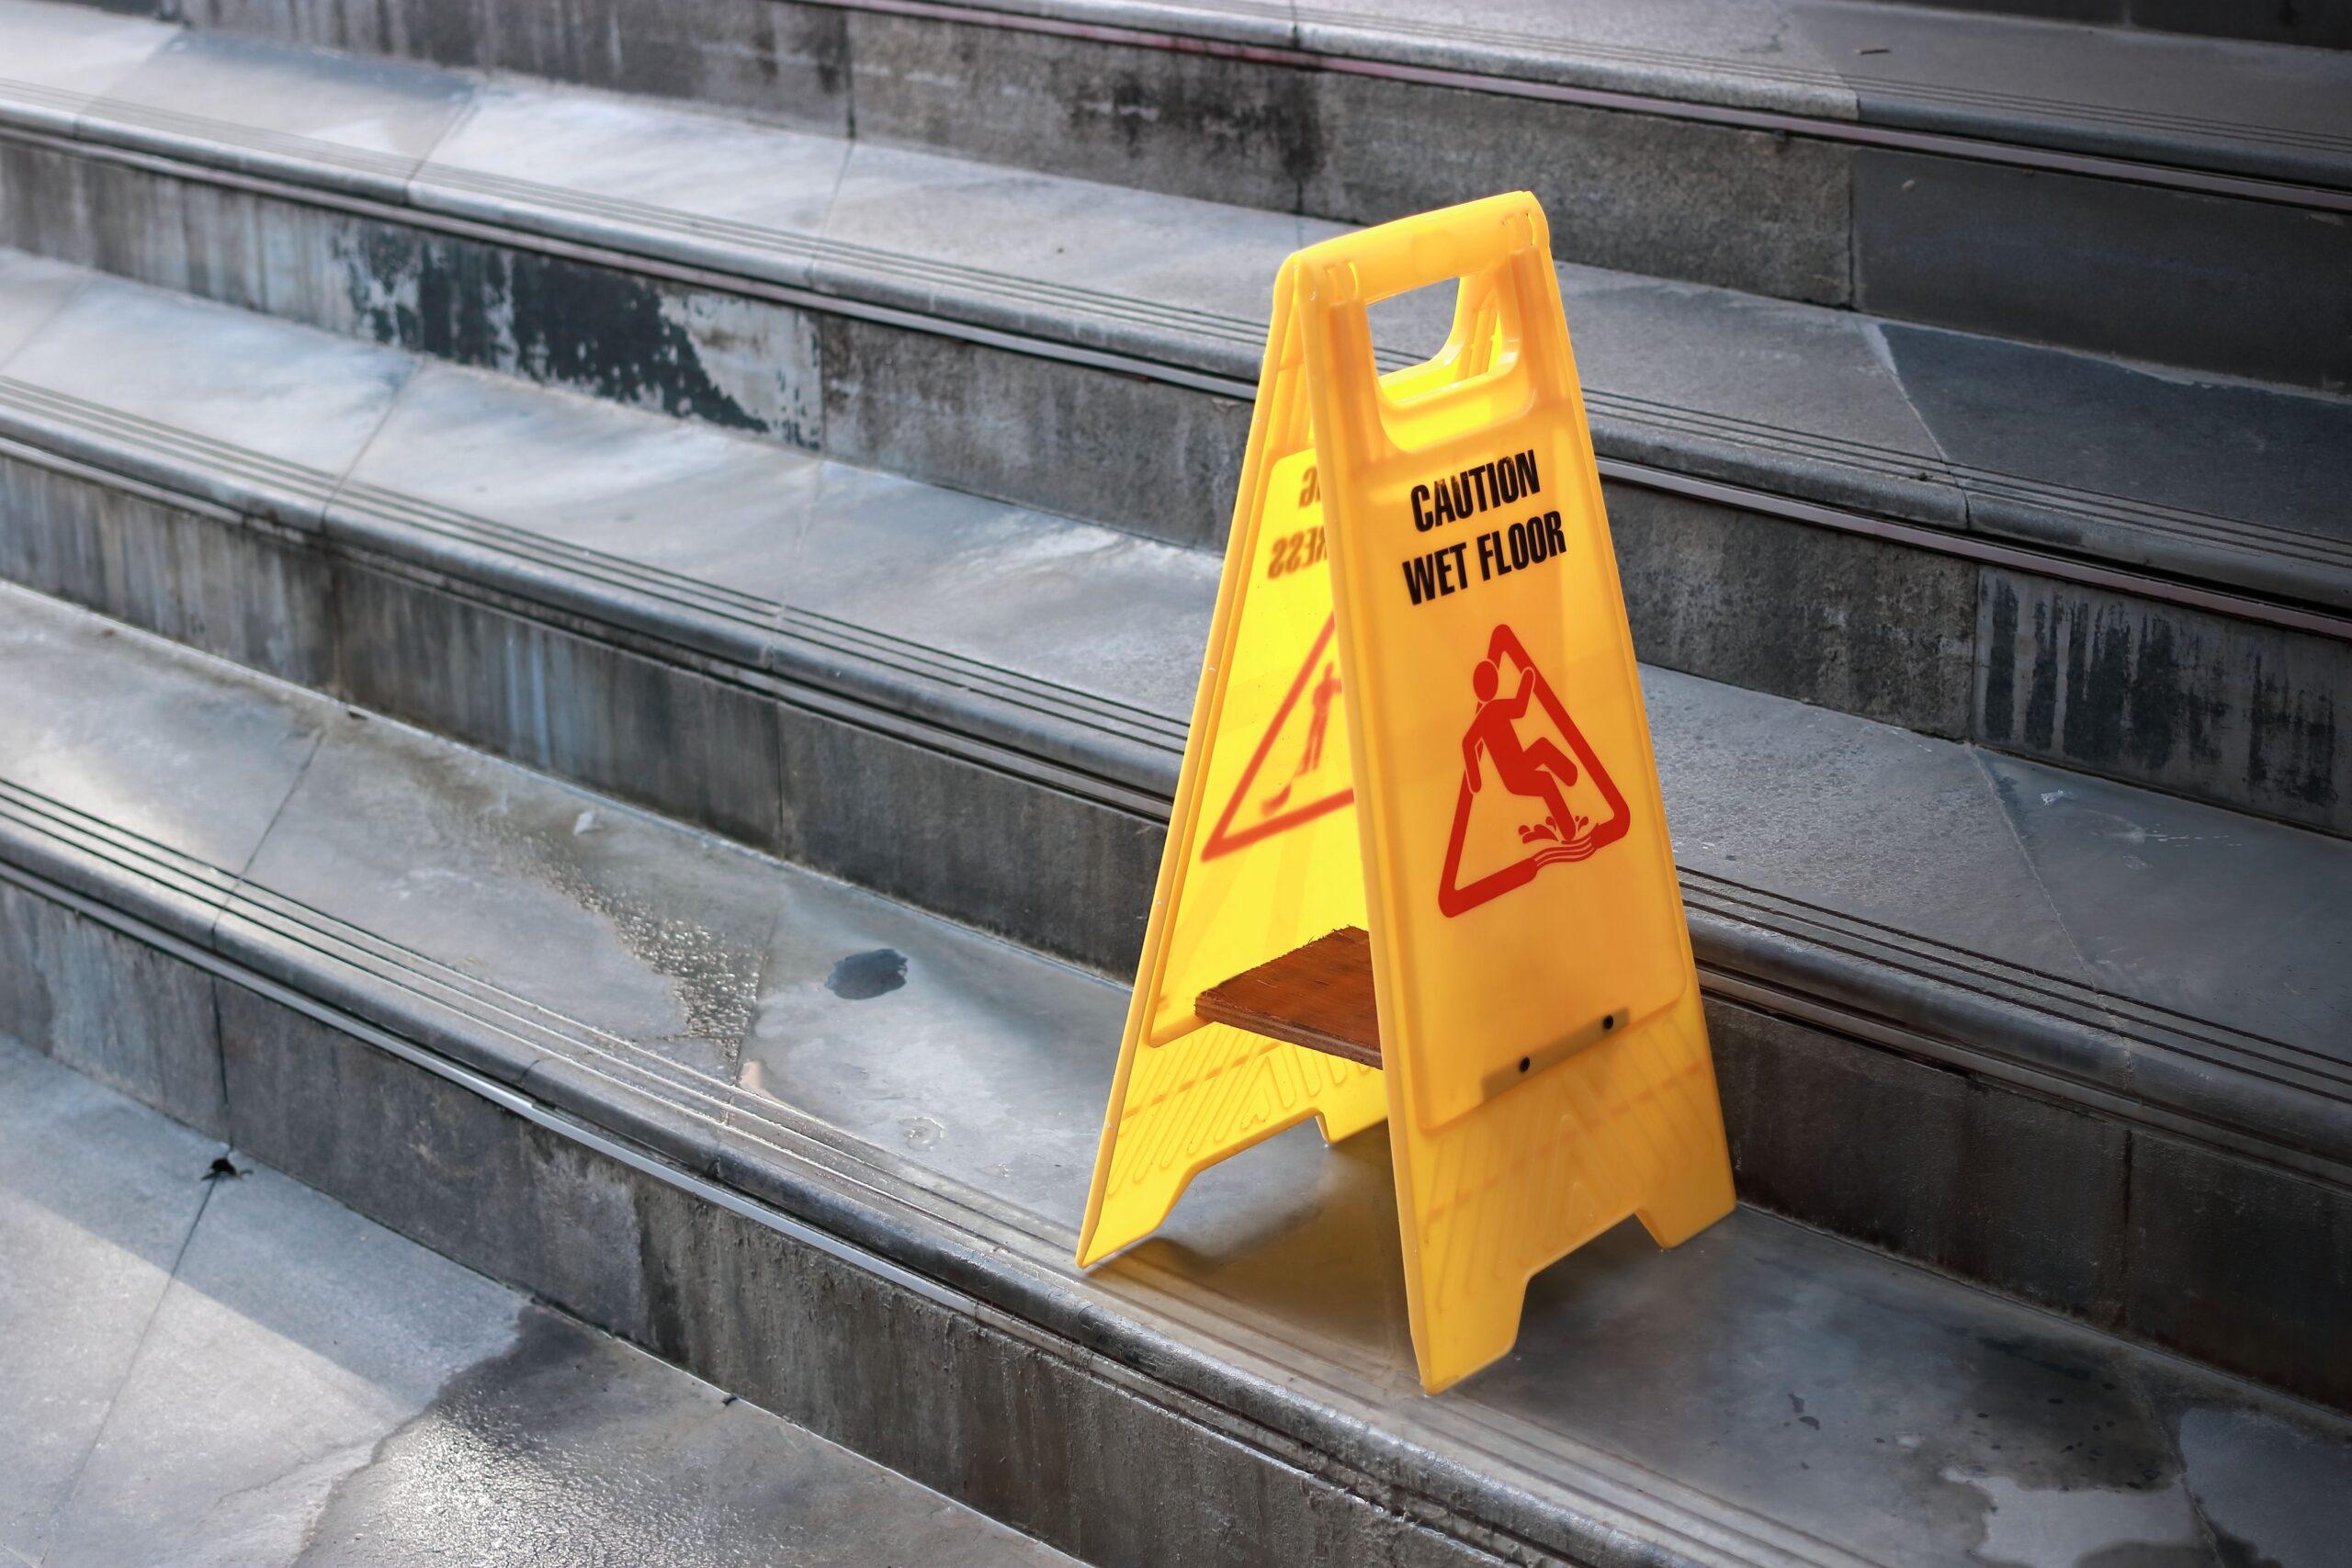 Commonly Asked Questions About North Carolina Premises Liability